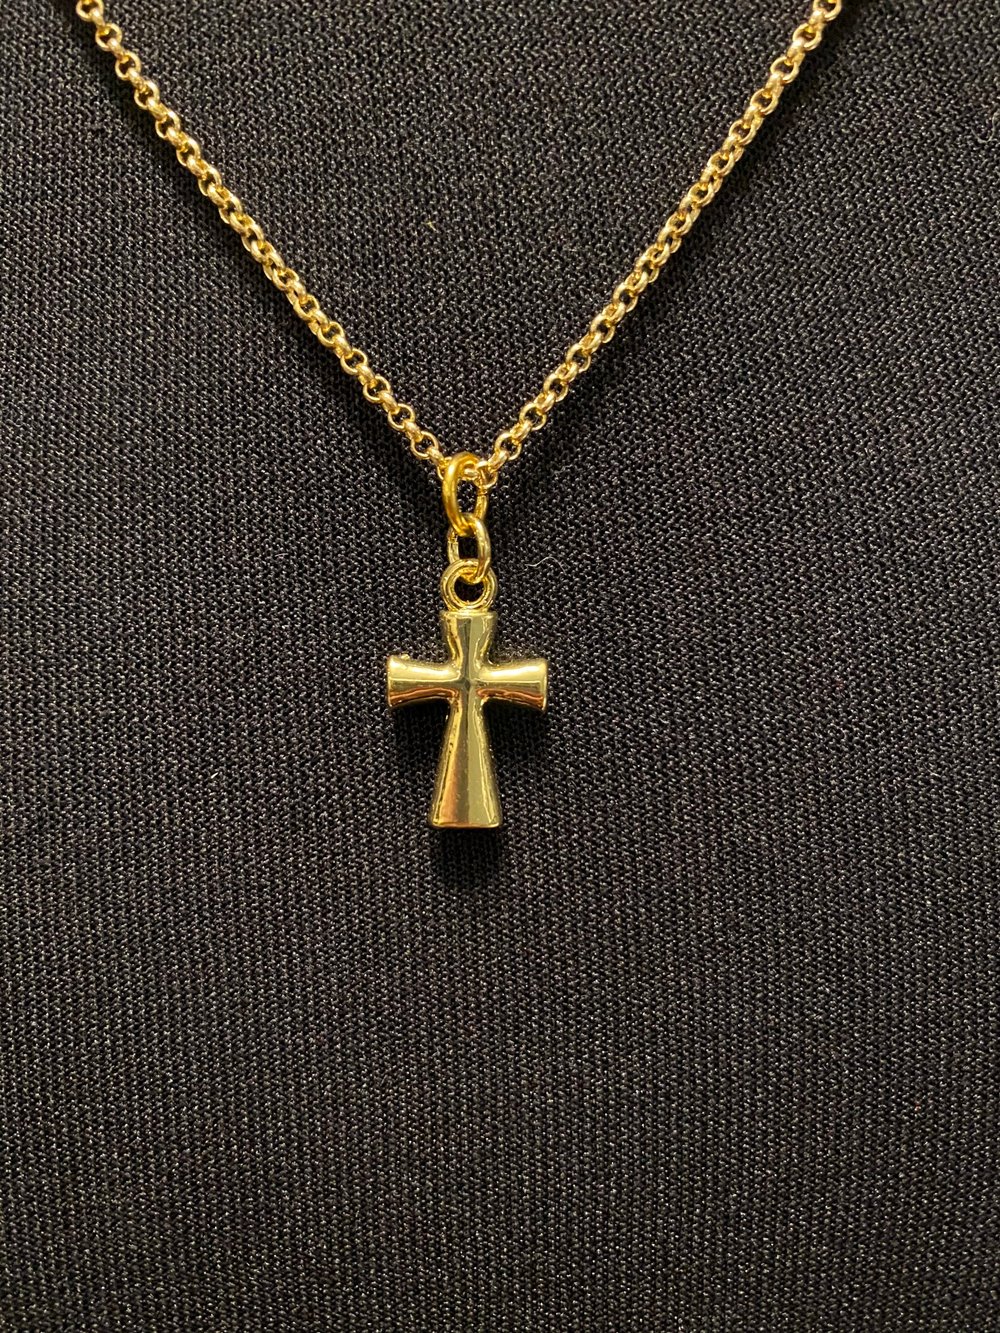 Cross Charm Pendant and Gold Chain Necklace